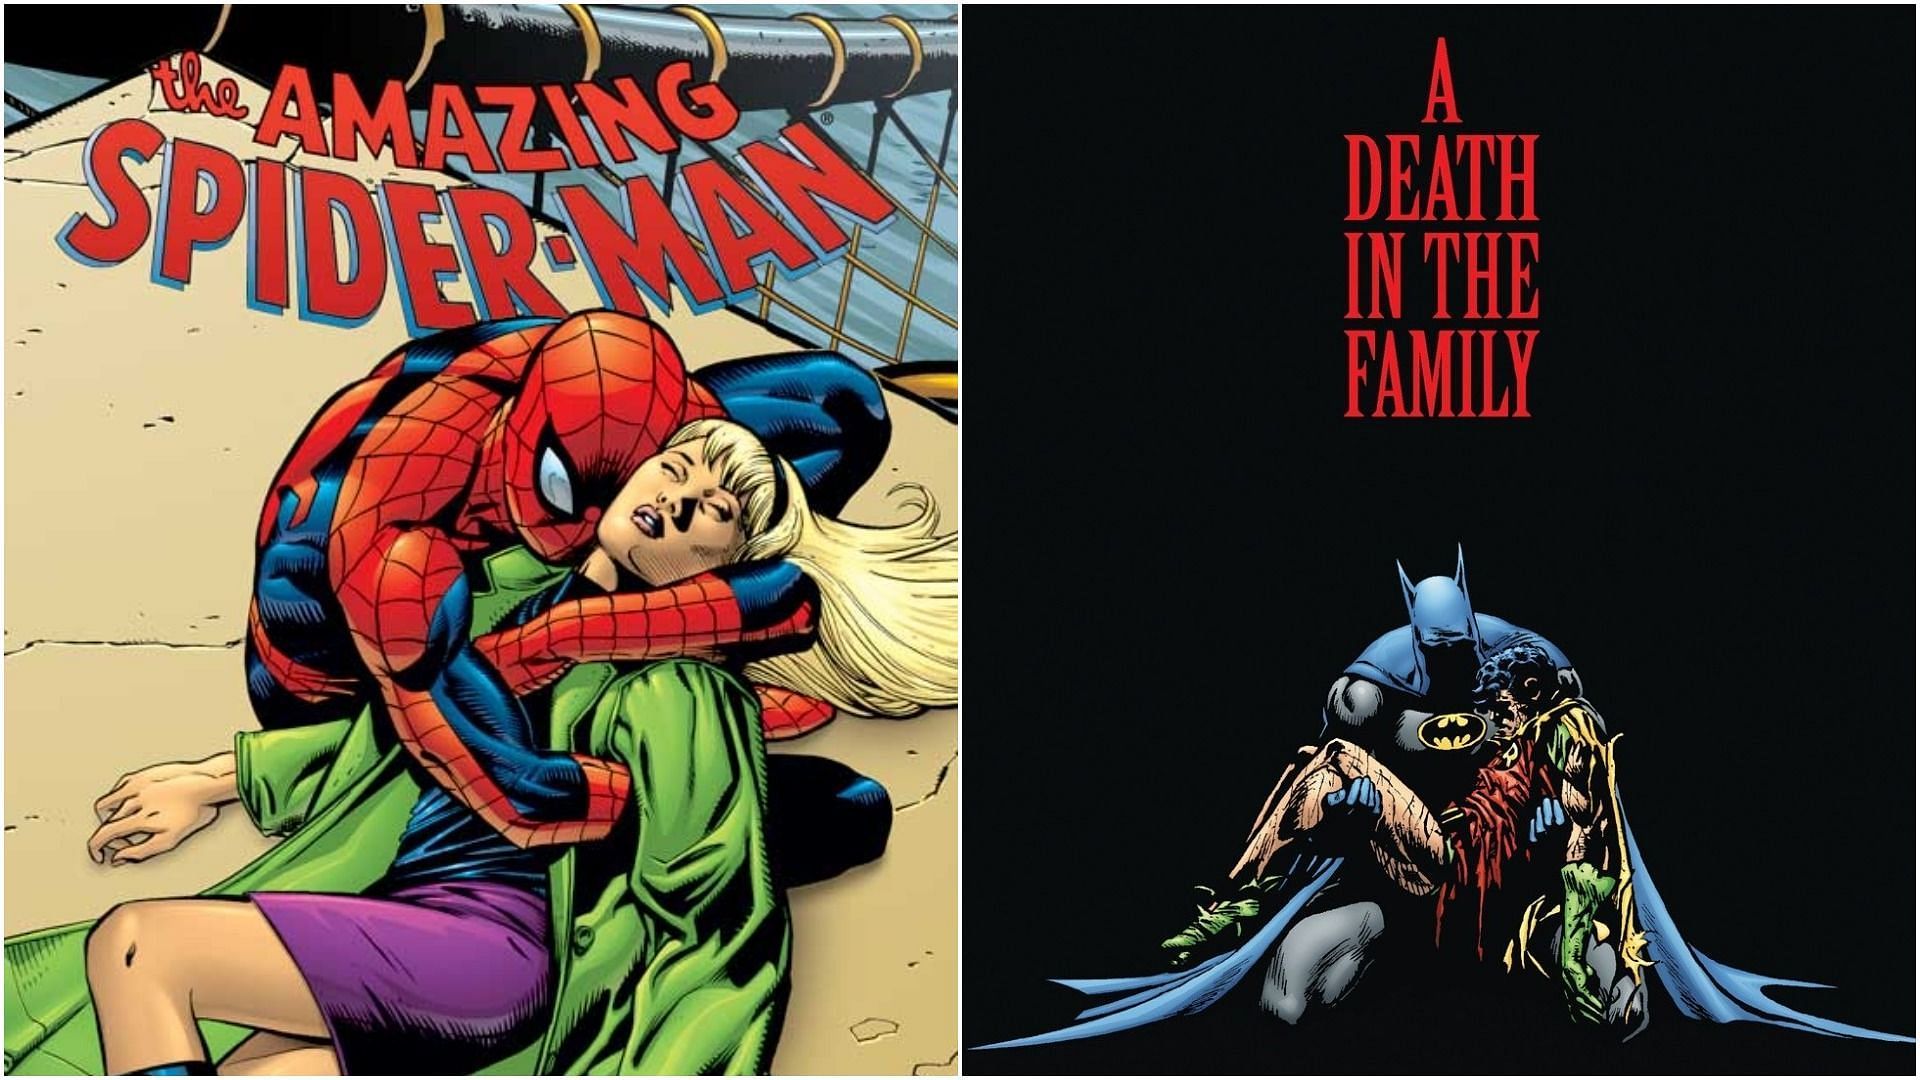 Comic book deaths hit as hard as on-screen ones (Images via DC Comics and Marvel Comics)